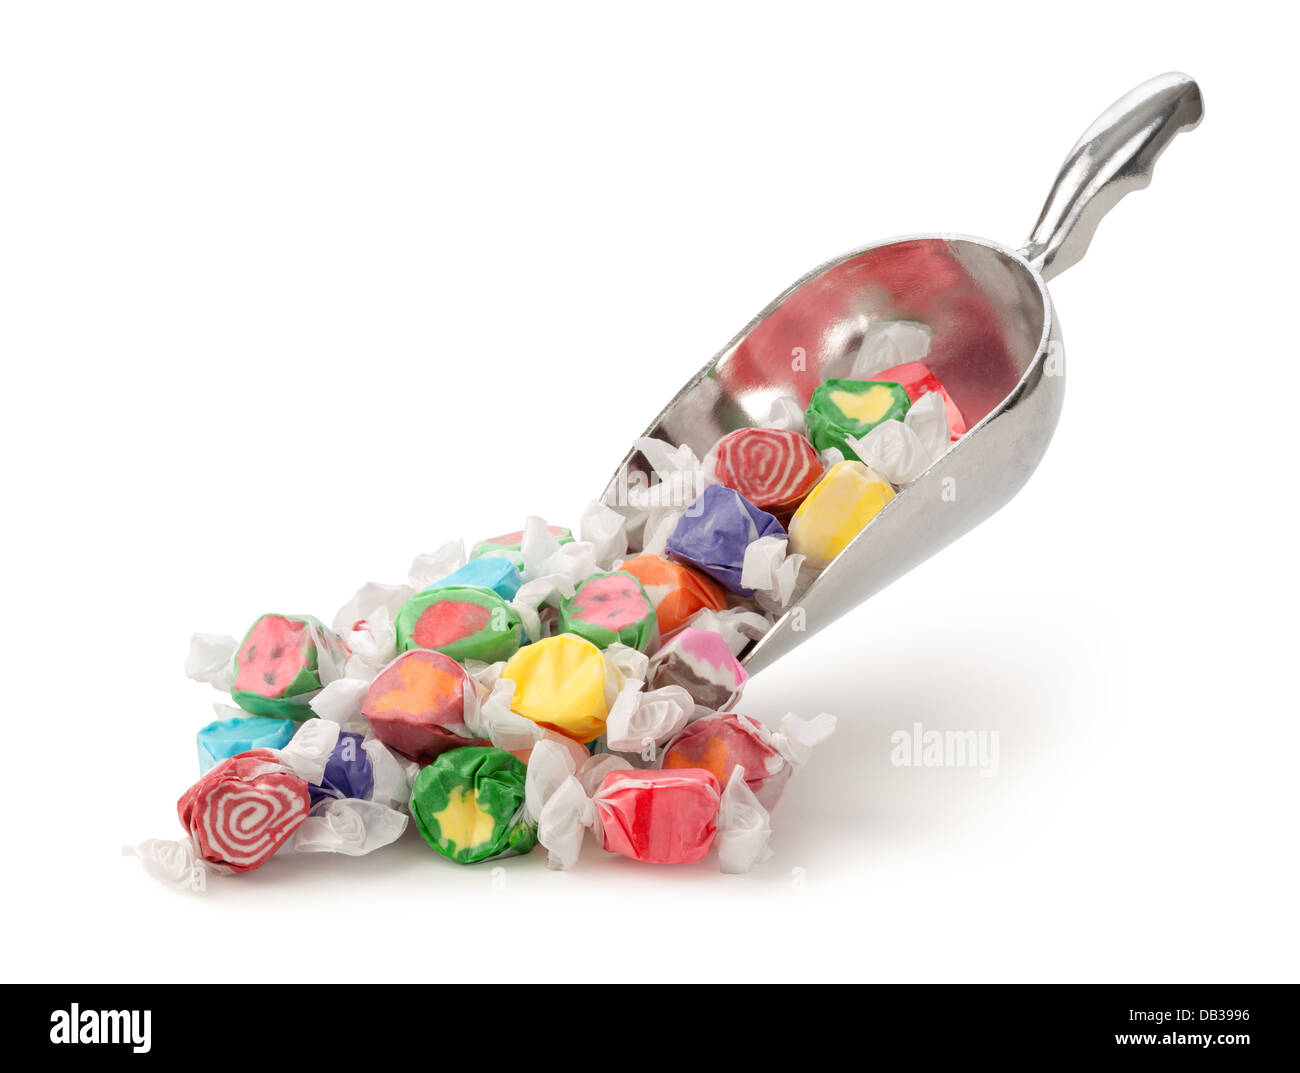 Salt Water Taffy in a scoop isolated on a white background. Stock Photo